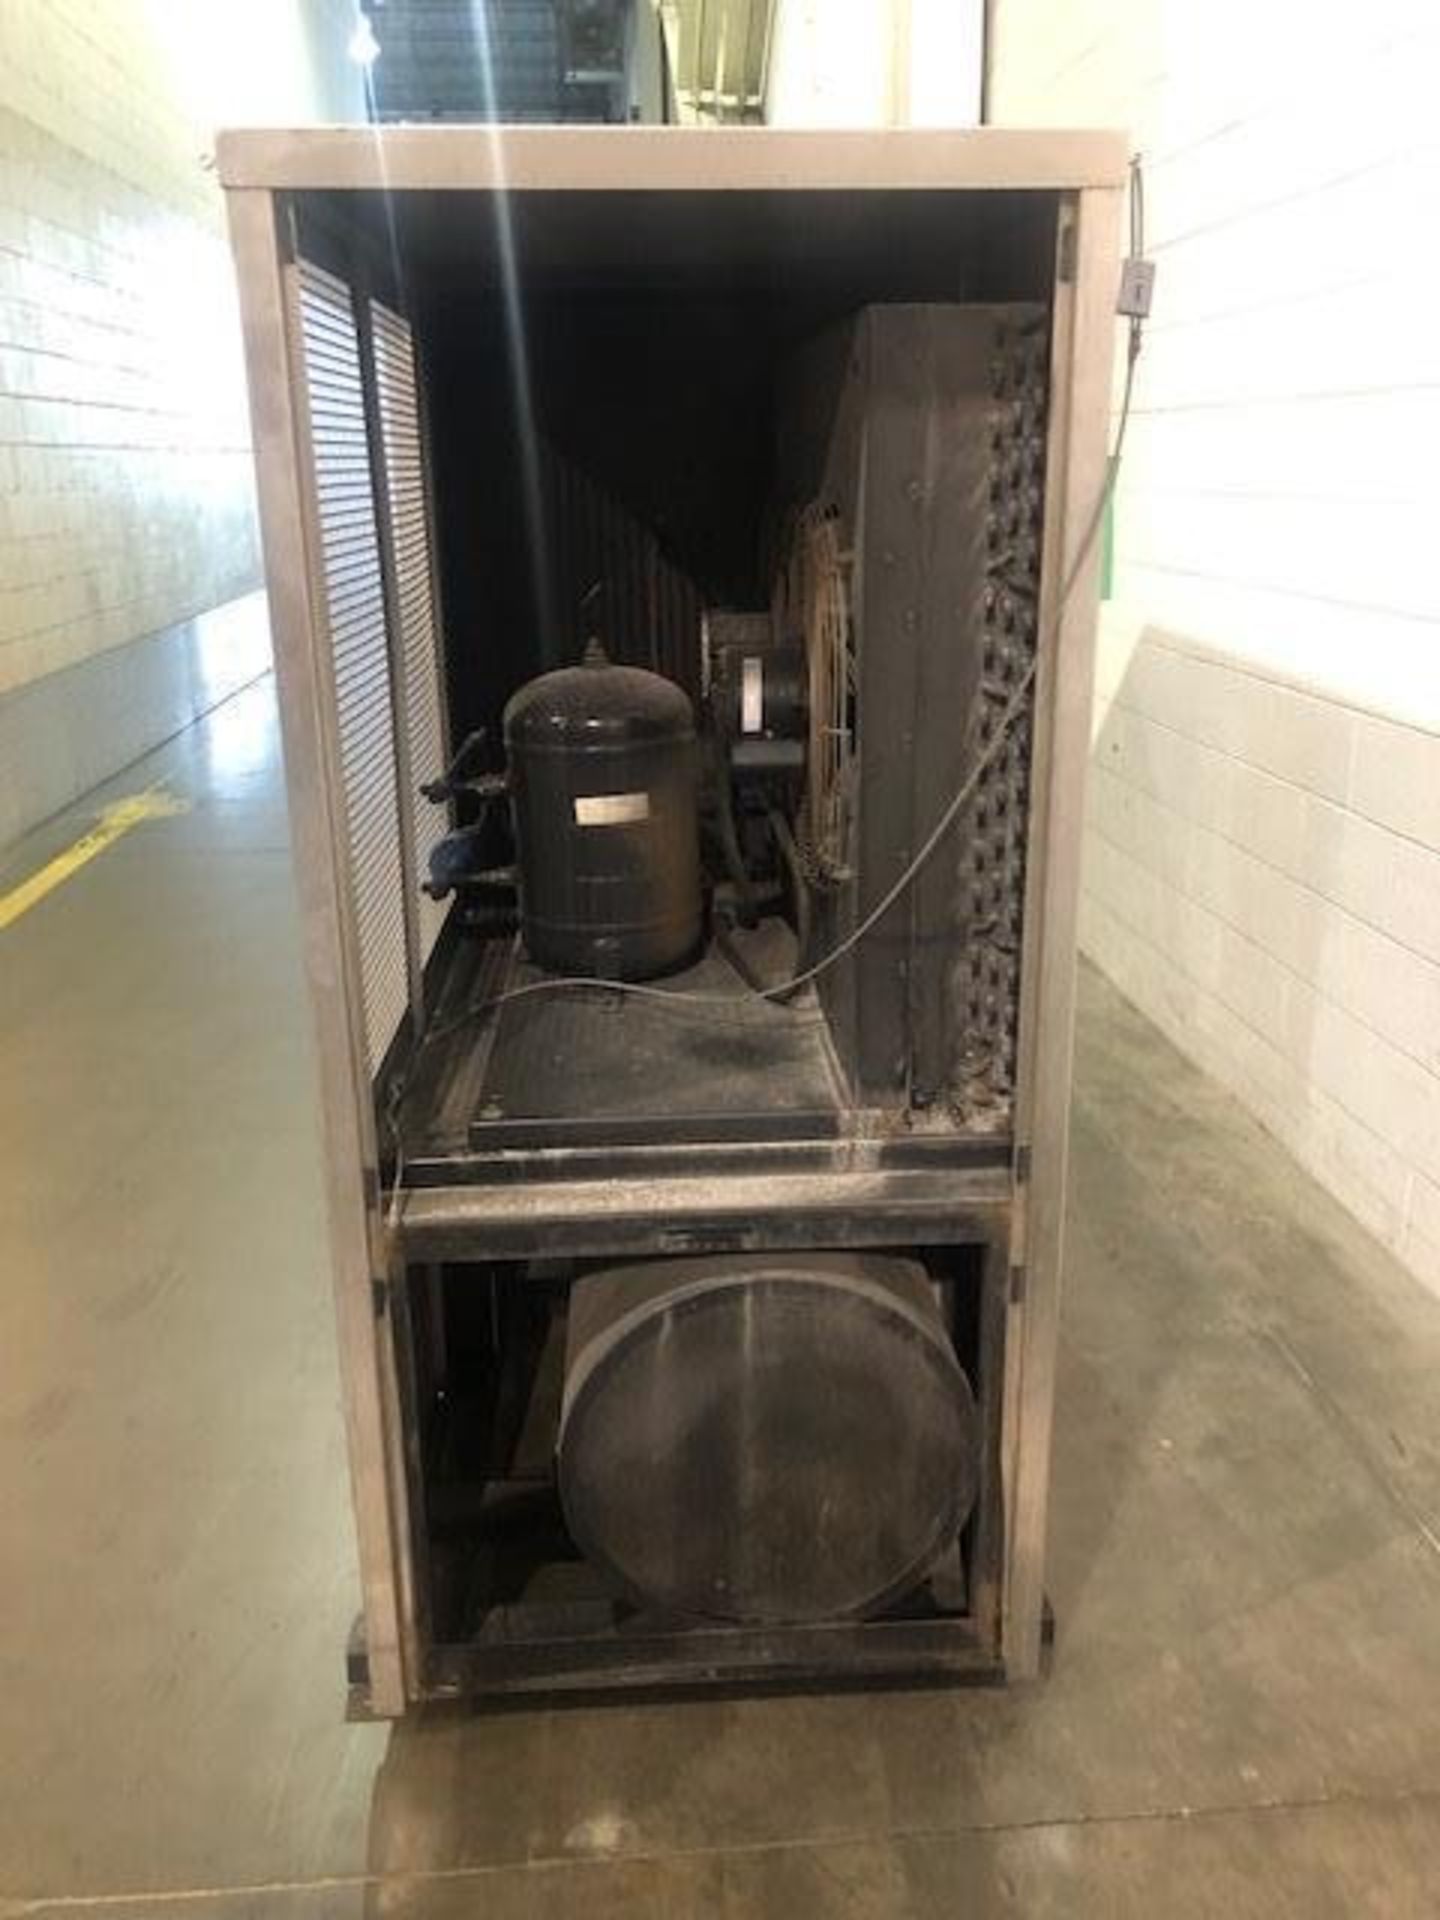 Filtrine Model PCP-500E-60A-WP-HTX Chiller, S/N: 6532-03 | Load Fee: $100 - Image 2 of 3